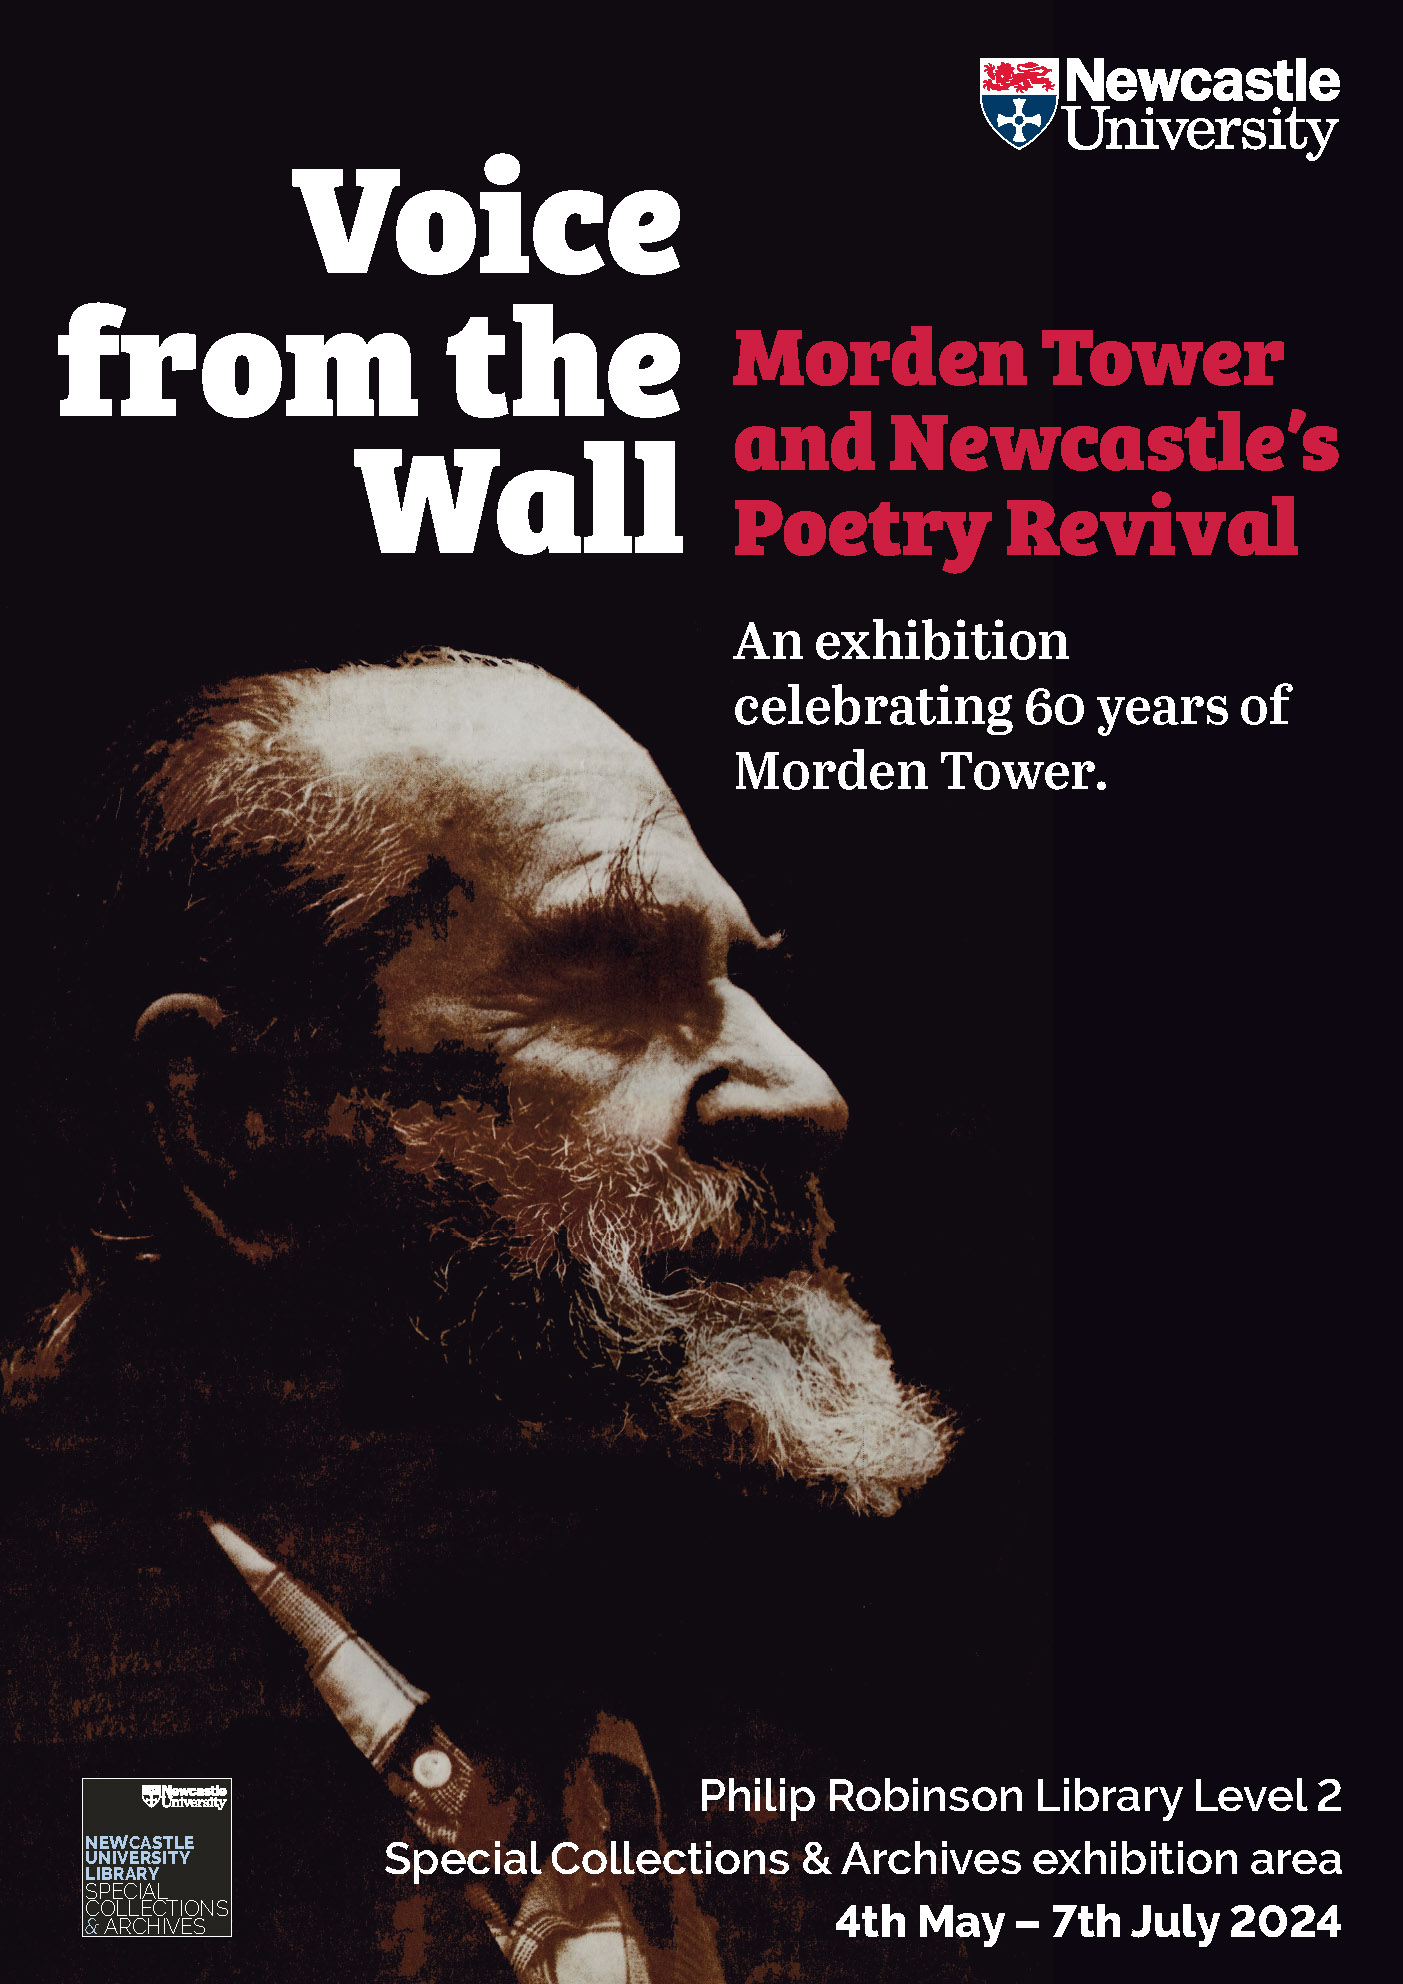 A poster from the Morden Tower exhibition, with a portrait of the poet Basil Bunting on a black background